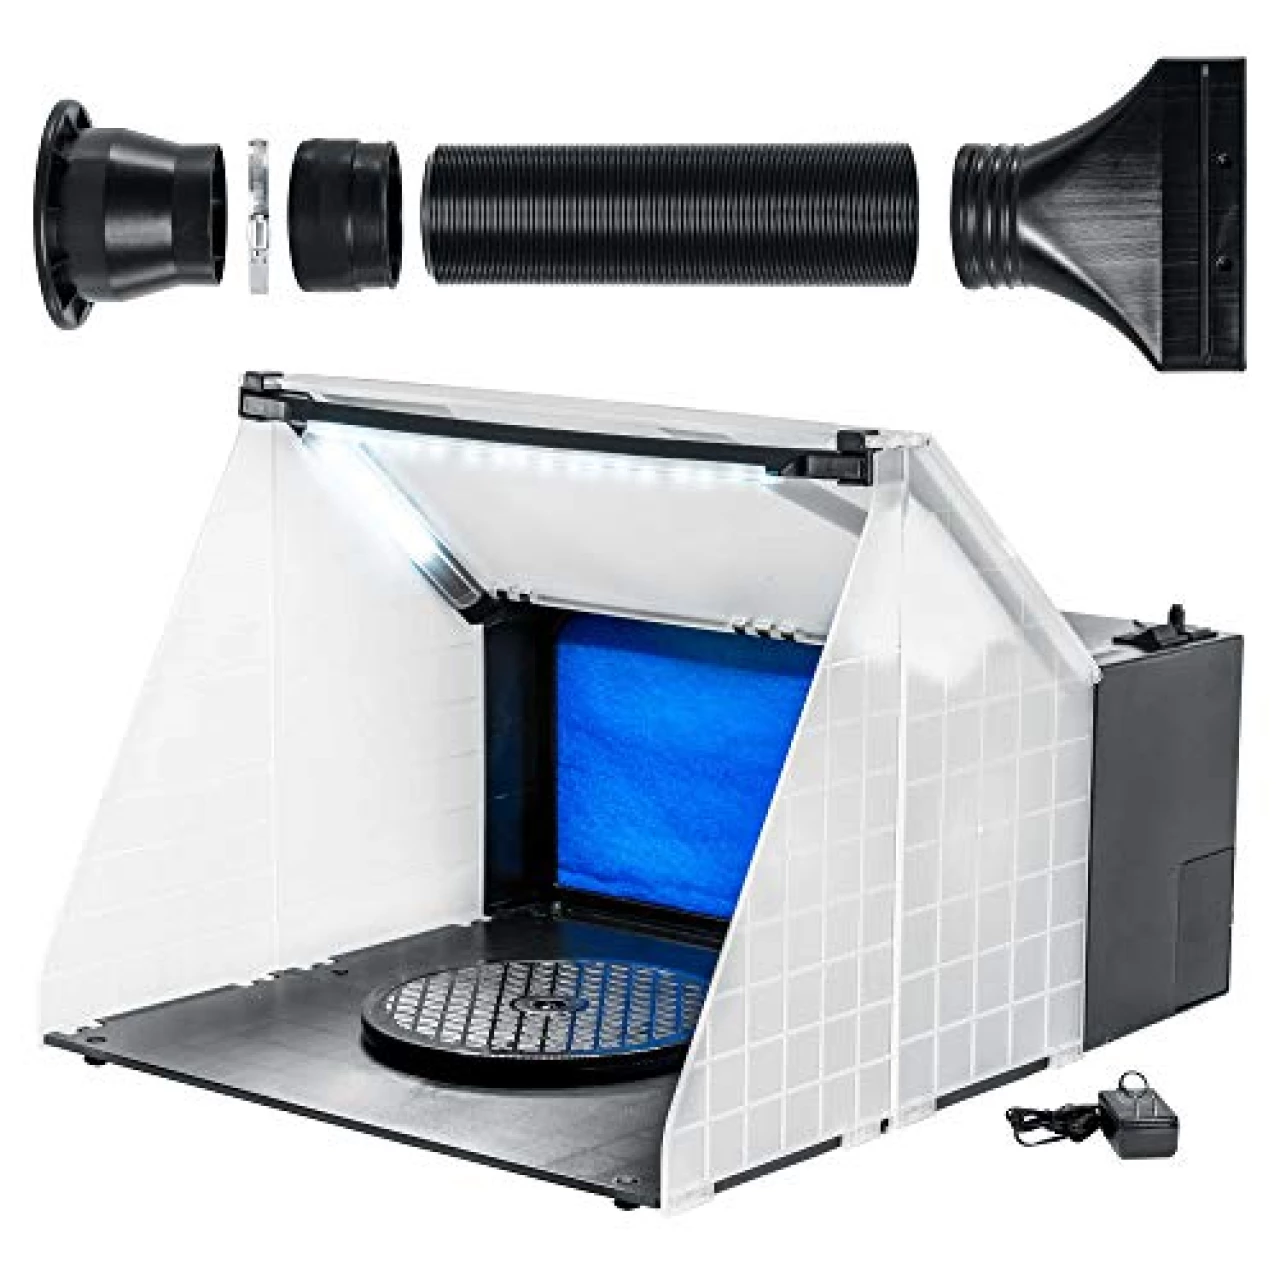 Master Airbrush Brand Lighted Portable Hobby Airbrush Spray Booth with LED Lighting